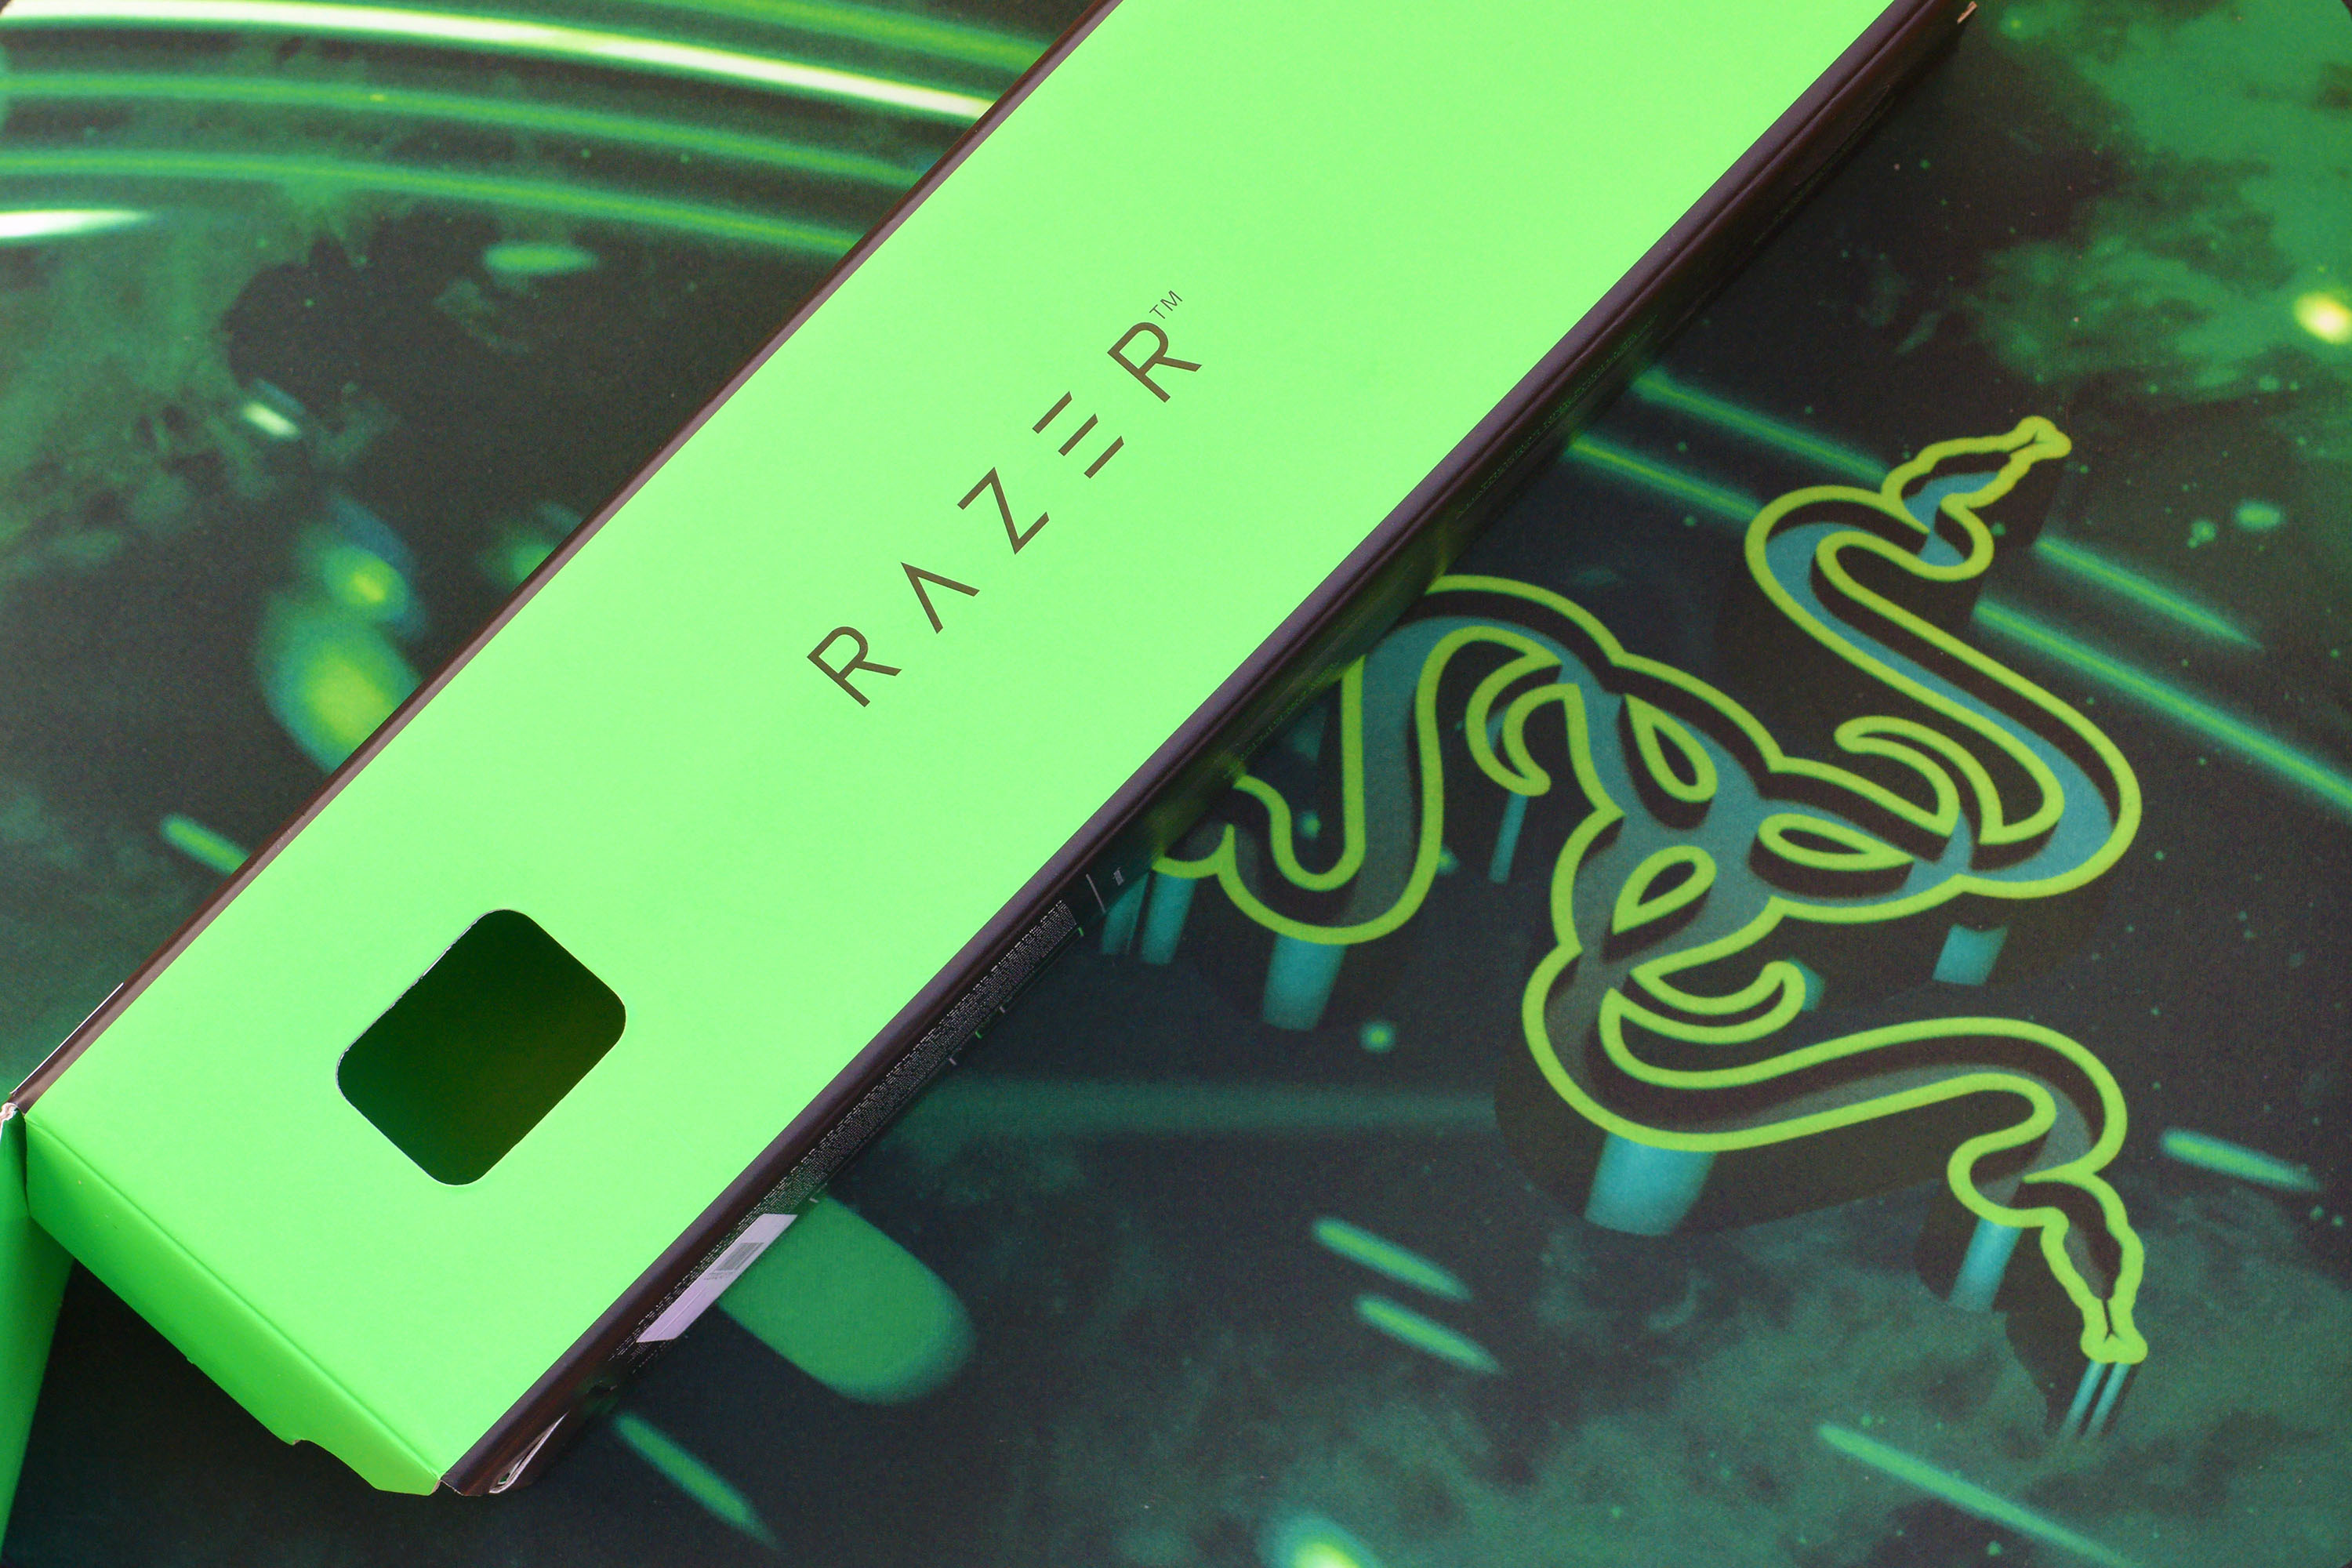 A Razer Goliathus Speed Gaming green mouse pad and box. 